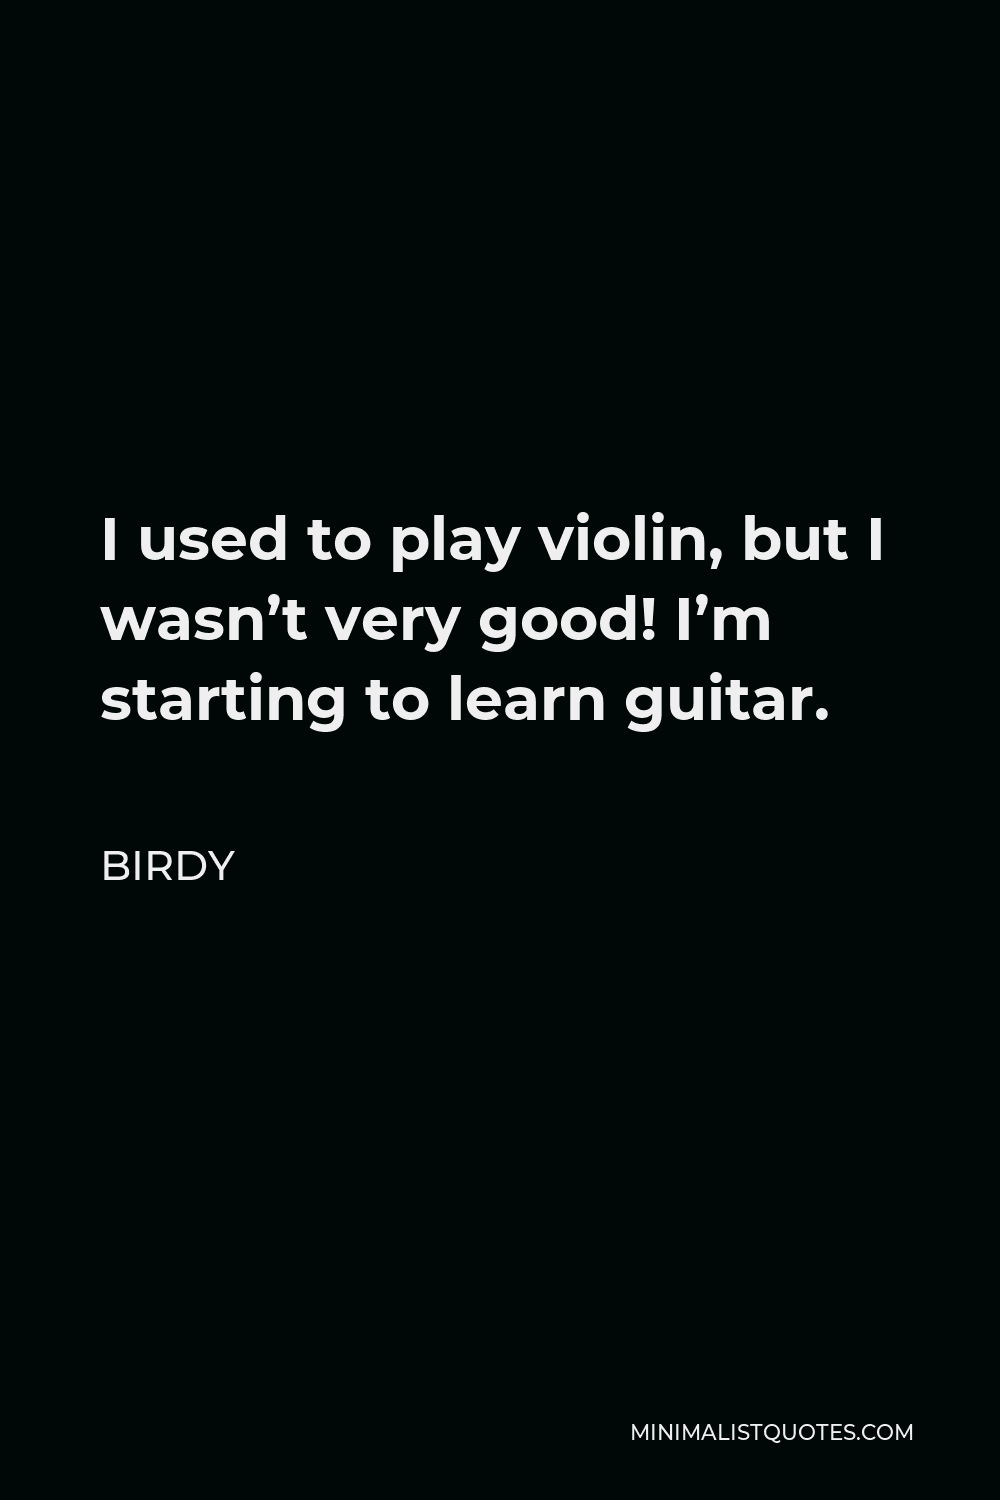 Birdy Quote - I used to play violin, but I wasn’t very good! I’m starting to learn guitar.